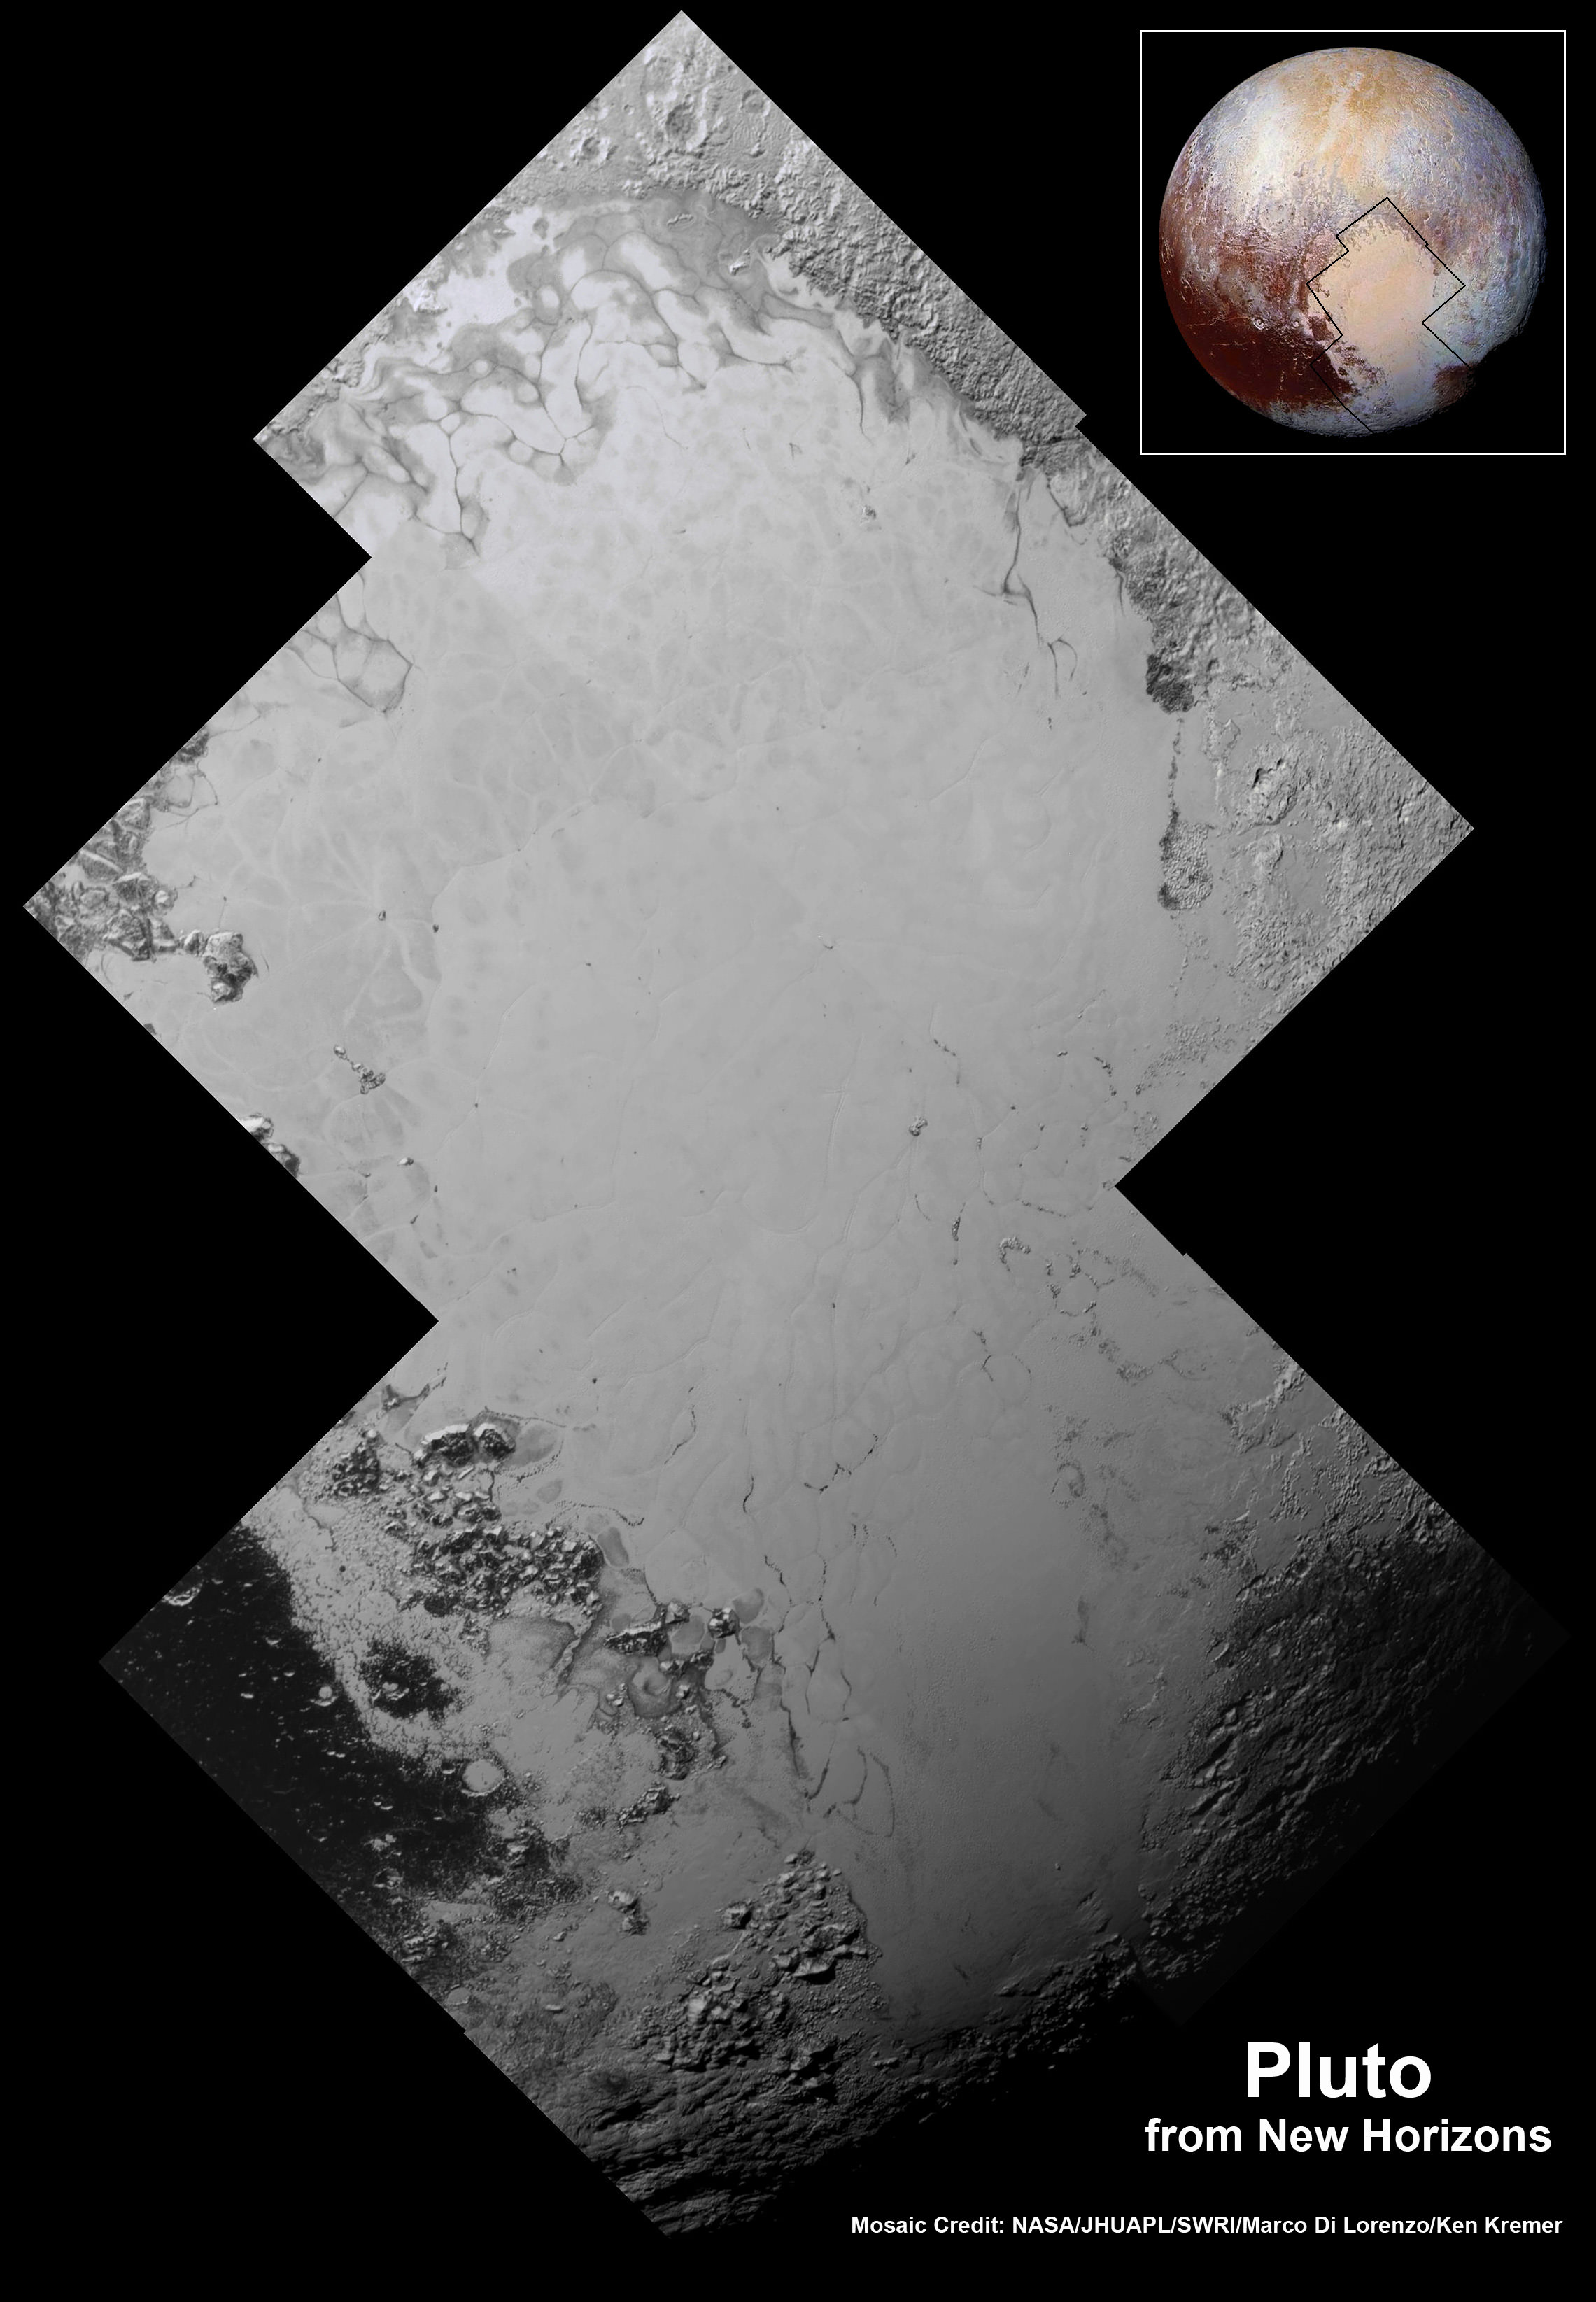 Highest resolution mosaic of ‘Tombaugh Regio’ shows the heart-shaped region on Pluto focusing on ice flows and plains of ‘Sputnik Planum’ at top and icy mountain ranges of ‘Hillary Montes’ and ‘Norgay Montes’ below.  This new mosaic combines the seven highest resolution images captured by NASA’s New Horizons LORRI imager during history making closest approach flyby on July 14, 2015.  Inset at right shows global view of Pluto with location of mosaic and huge heart-shaped region in context.  Credit: NASA/JHUAPL/SWRI/Marco Di Lorenzo/Ken Kremer/kenkremer.com    